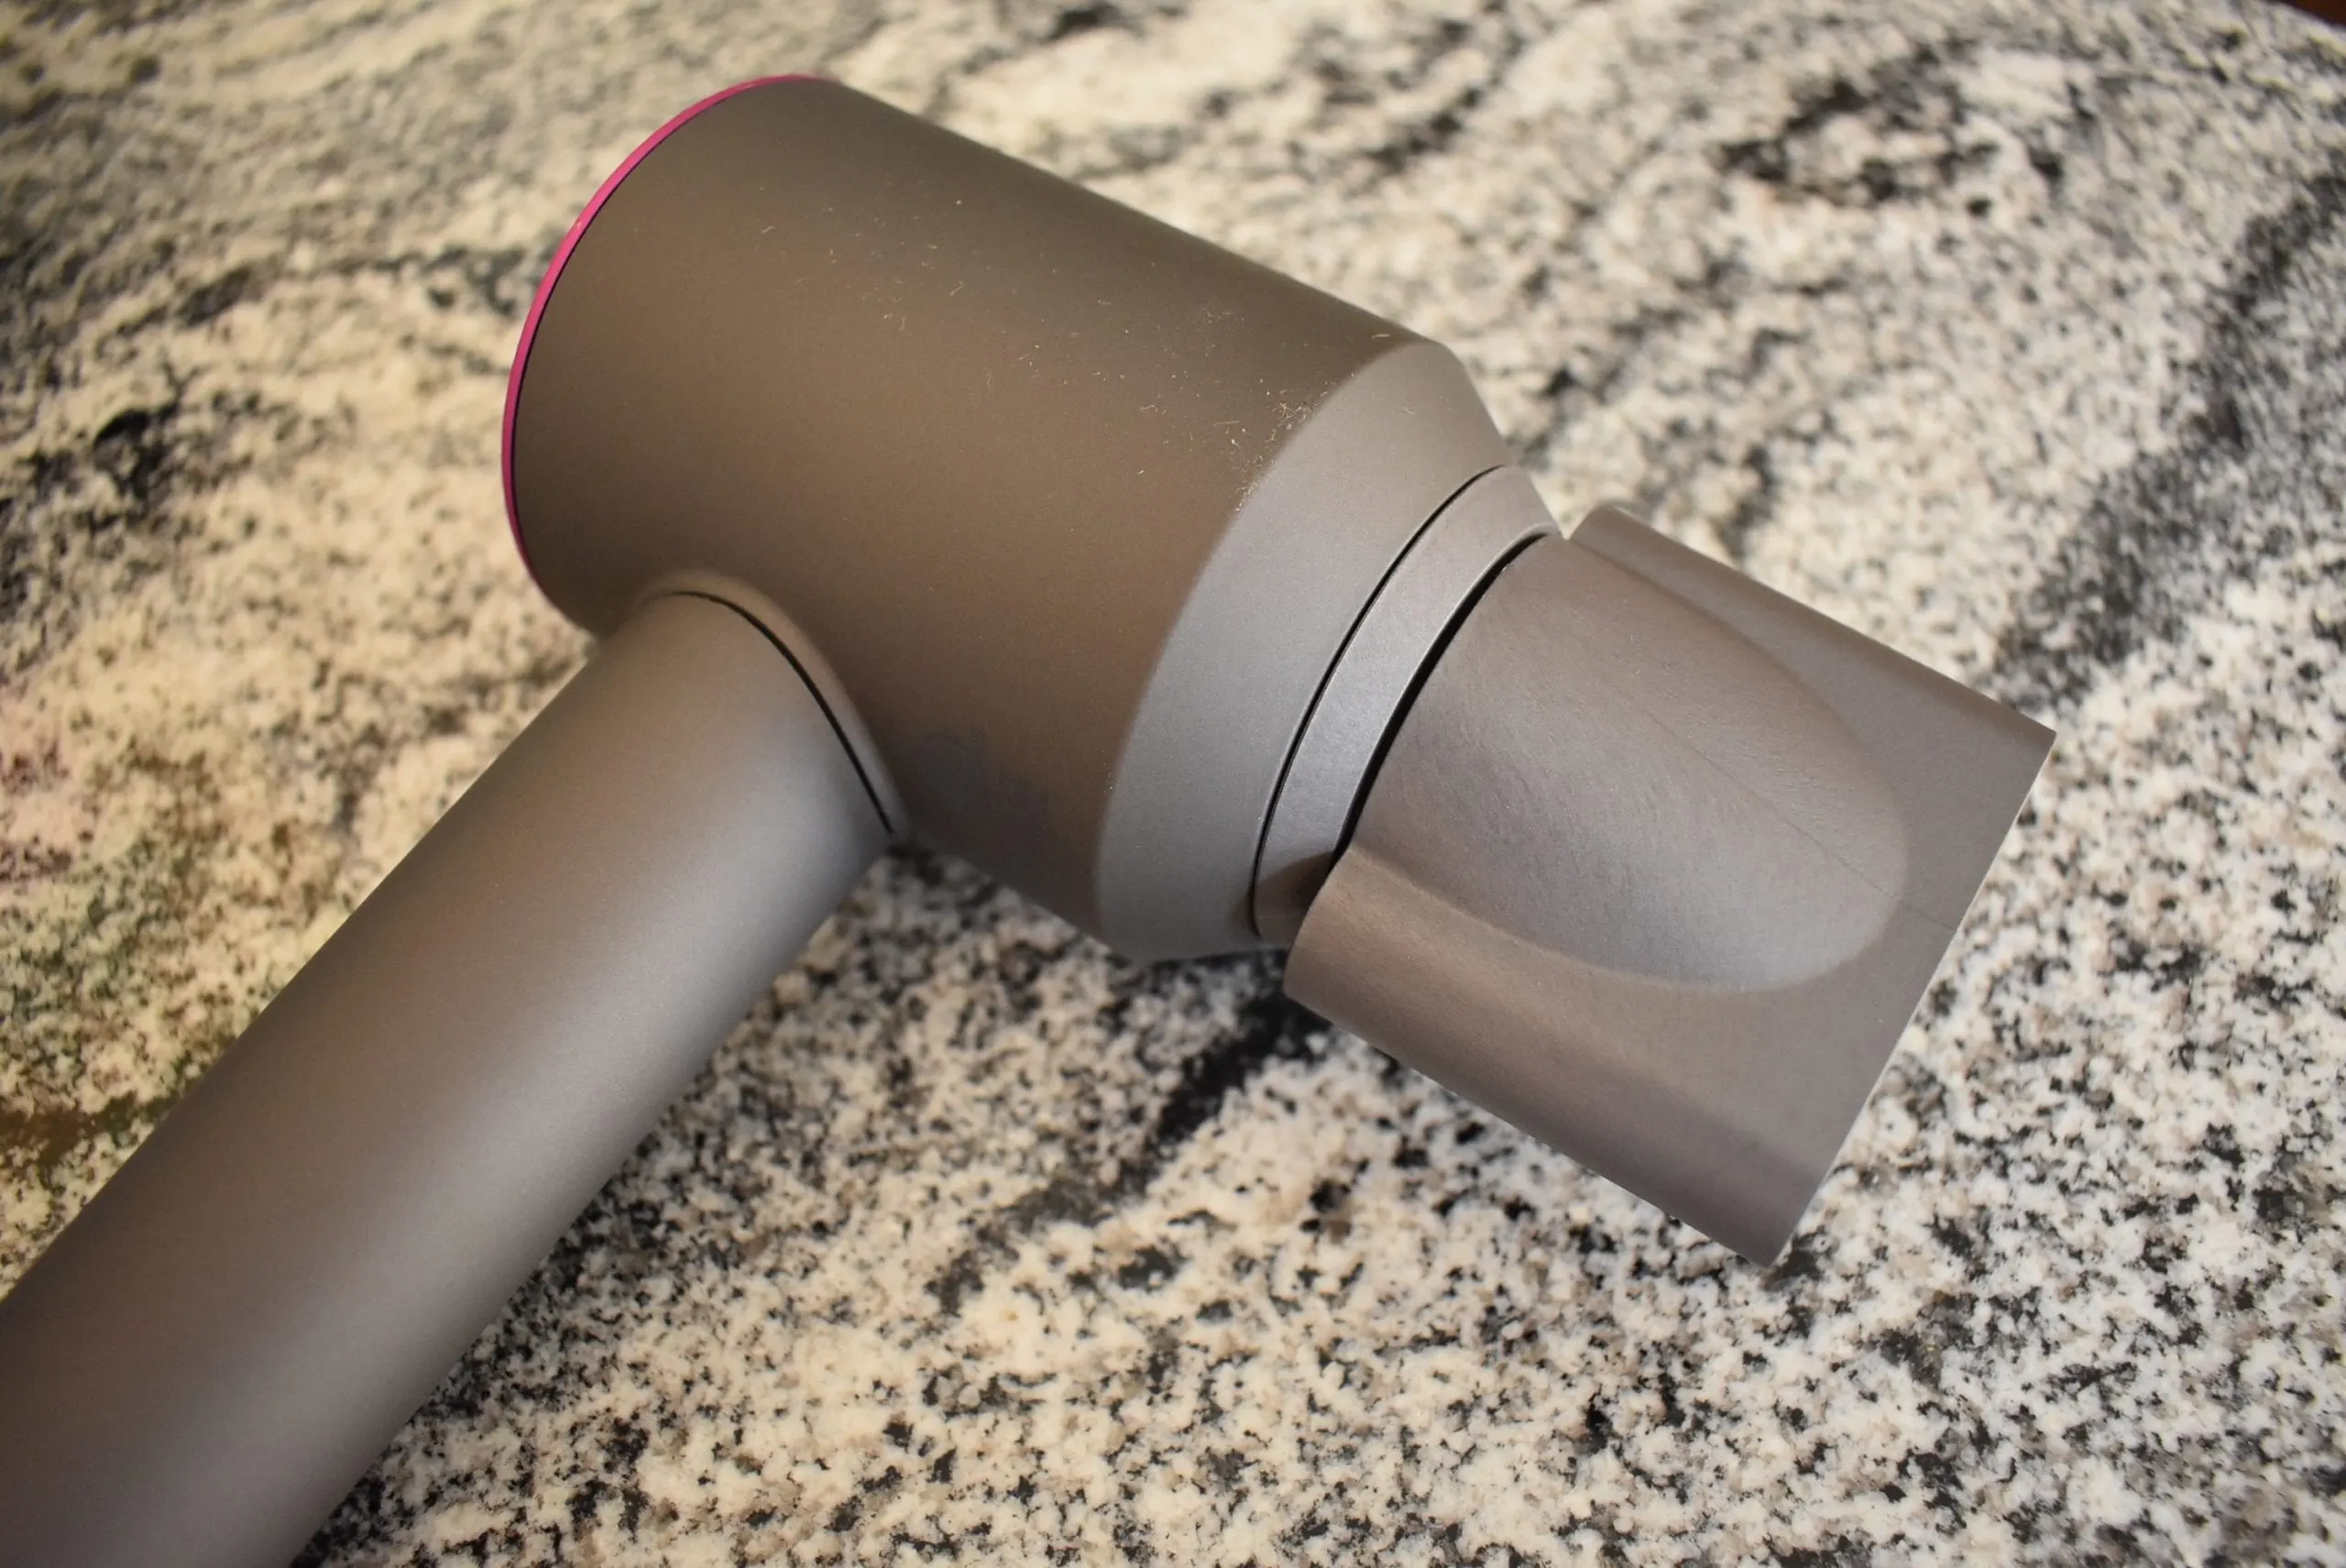 For a dyson hair dryer review, an attachment clips onto the front via a magnet